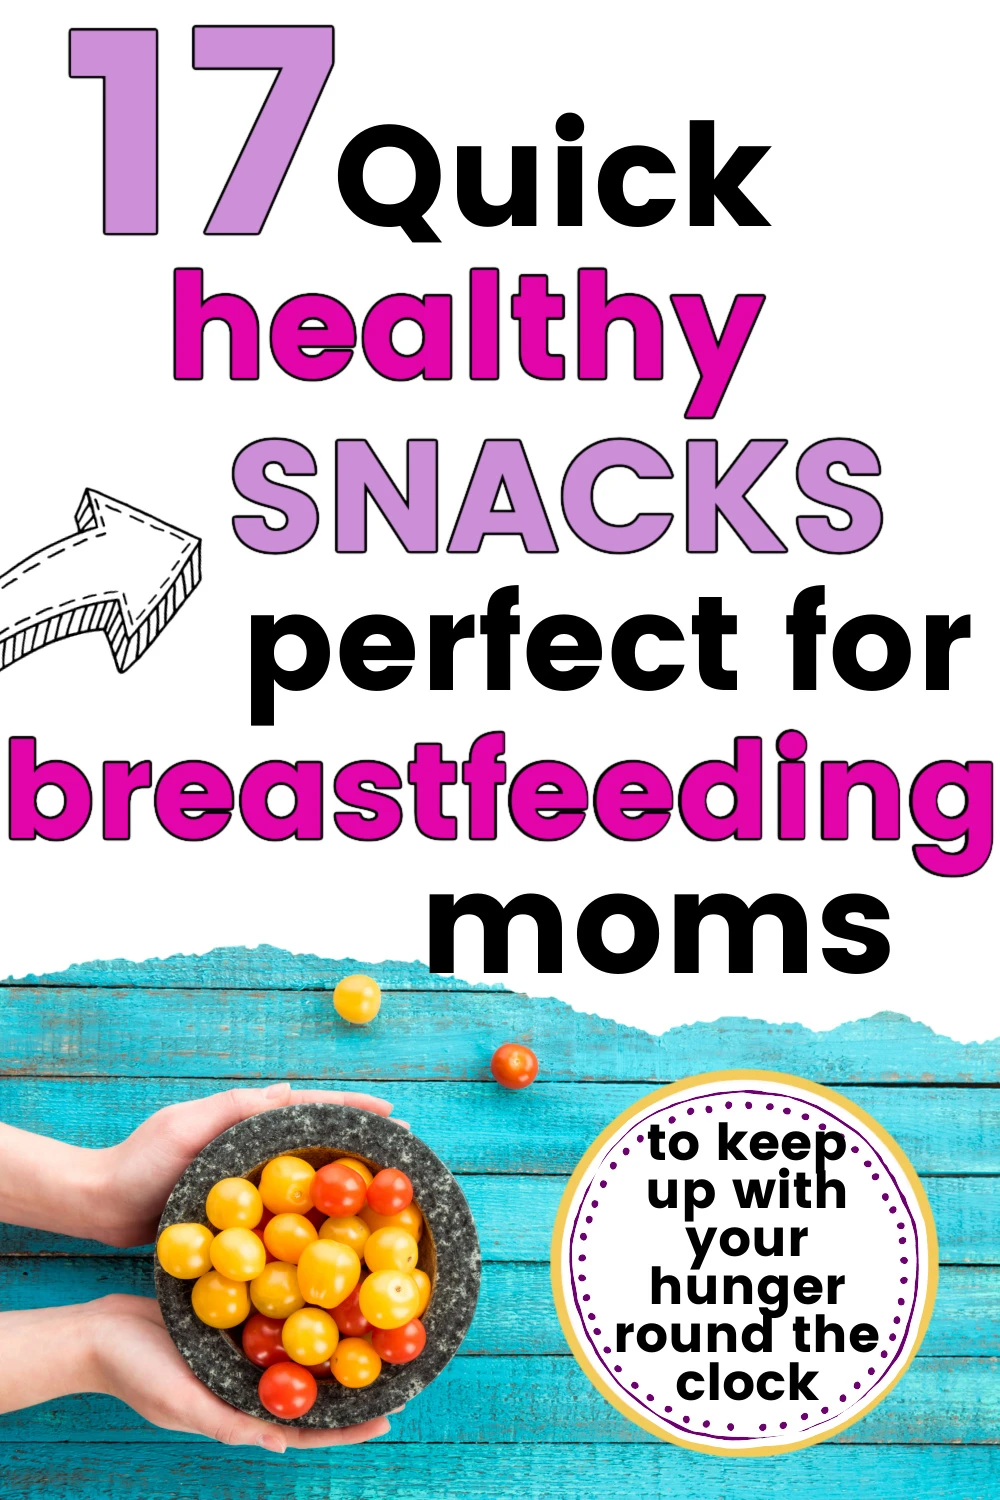 bowl of cherry tomatoes with text overlay, "17 quick healthy snacks, perfect for breastfeeding moms".